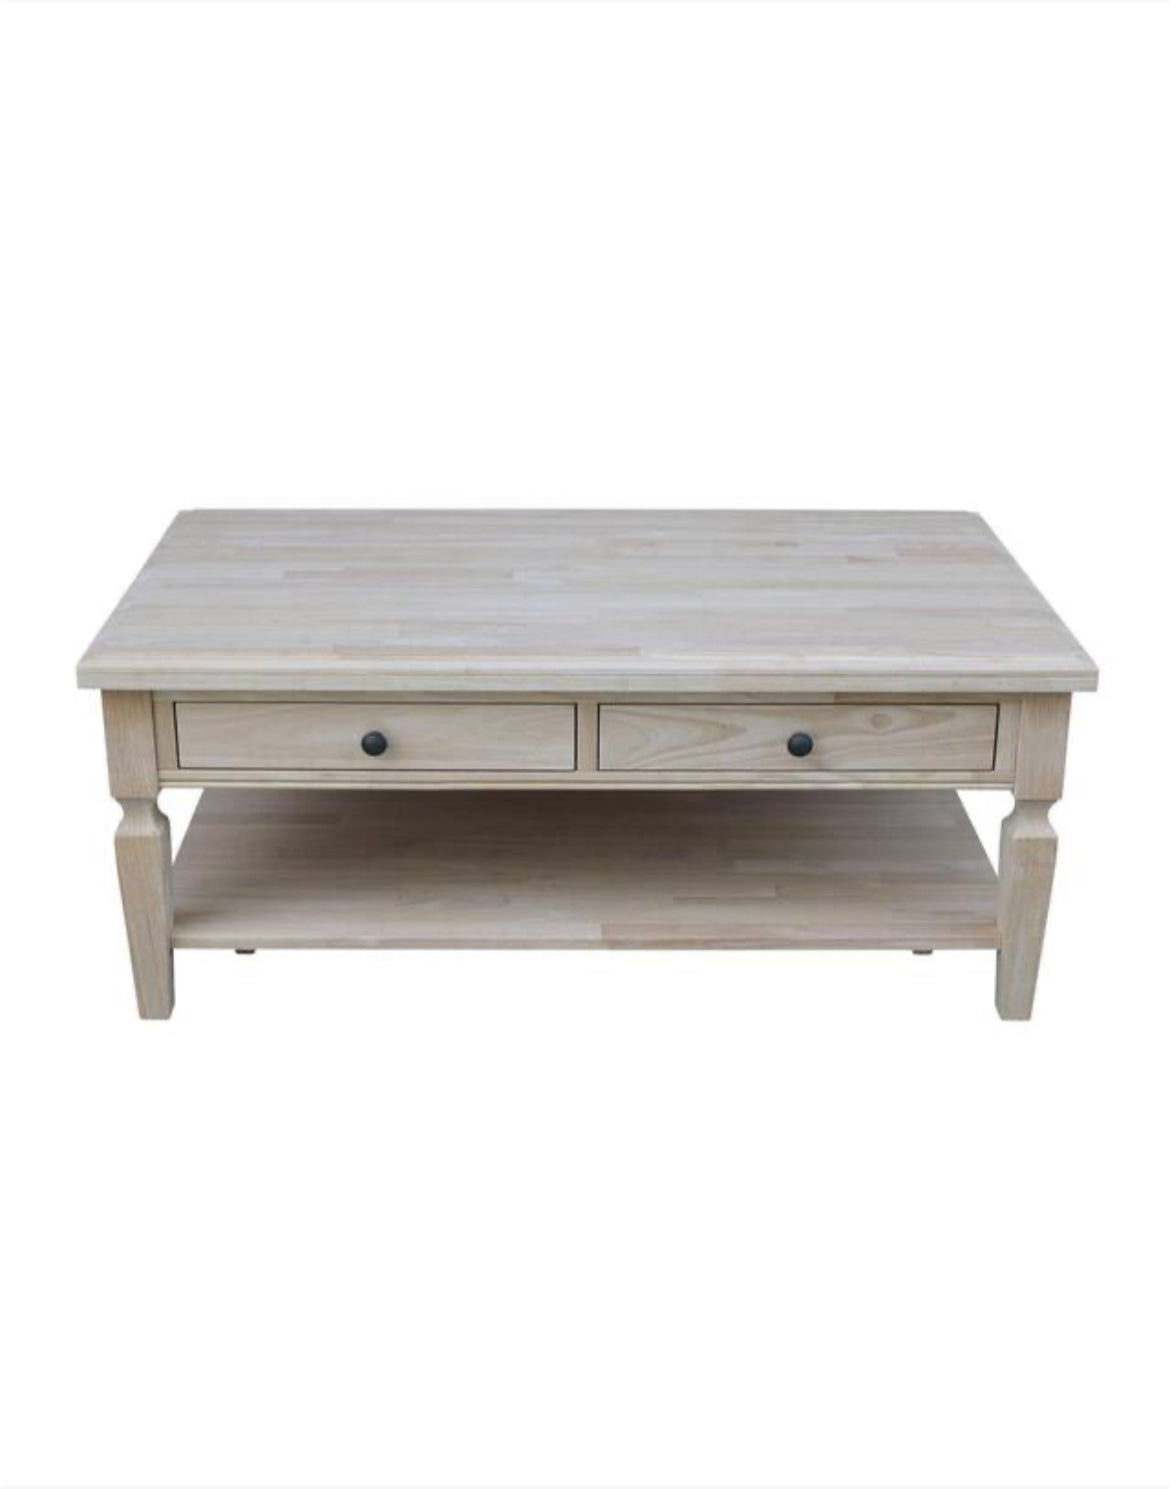 Vista 48 in. Unfinished Wood Large Rectangle Coffee Table with Drawers